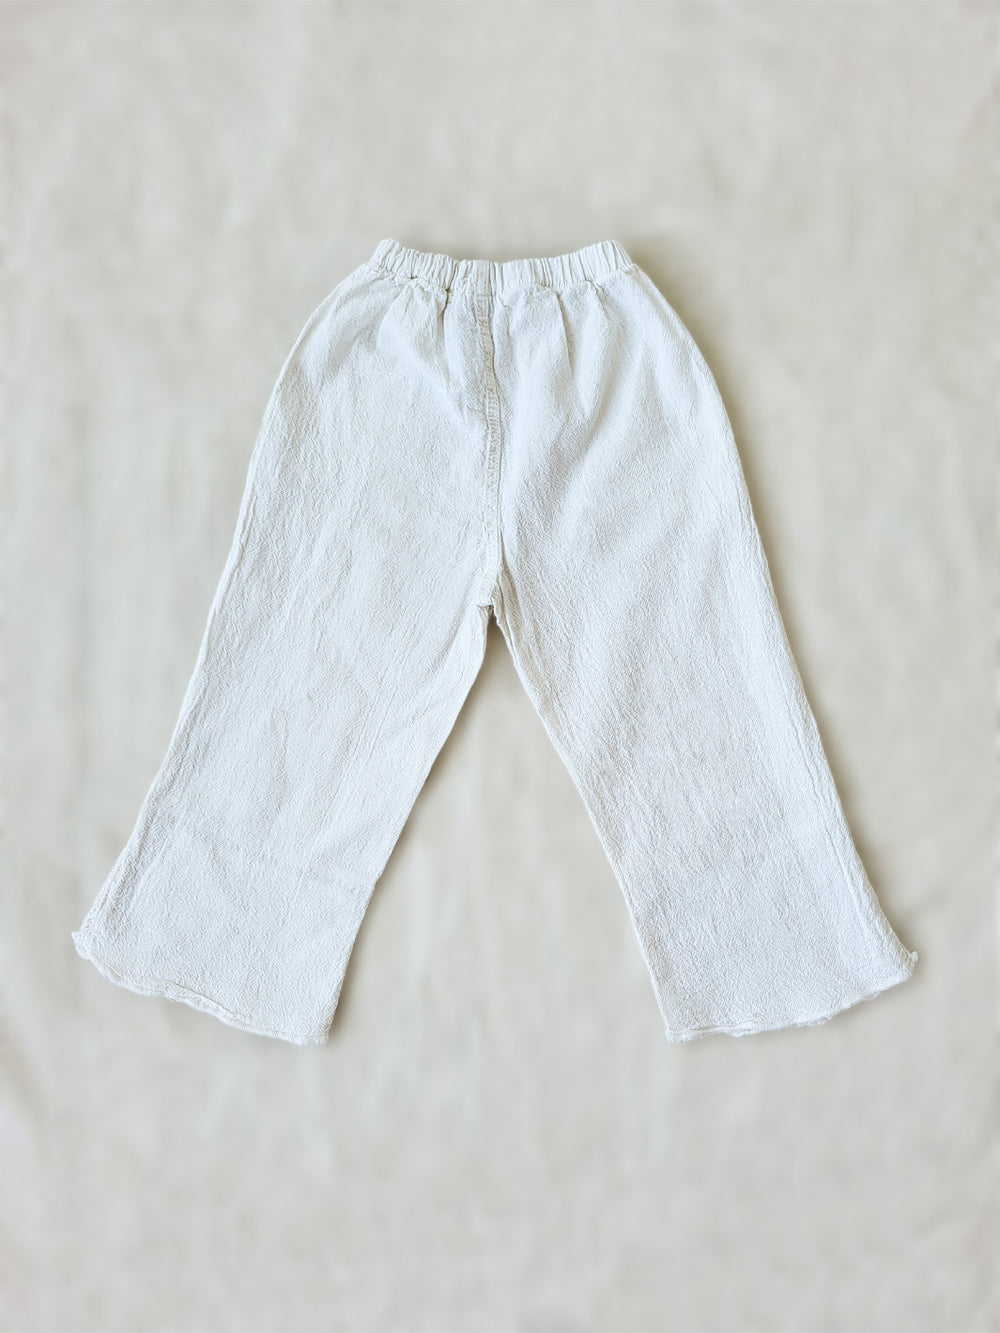 Liten Aventuris brand. Keep your little girl comfy and stylish in our Annie Pants! These natural cotton pants feature playful knitted cotton patterns at the bottom for added breeziness. With front pockets for keeping those special treasures! The soft material will keep your young one feeling silky. Pair this loose-fitting design with our Annie Blouse for the perfect winning combo! Flickan Byxor, Barns bomullskläder, svenska kläder, flickans byxor, ekologisk kläder, babis byxor.